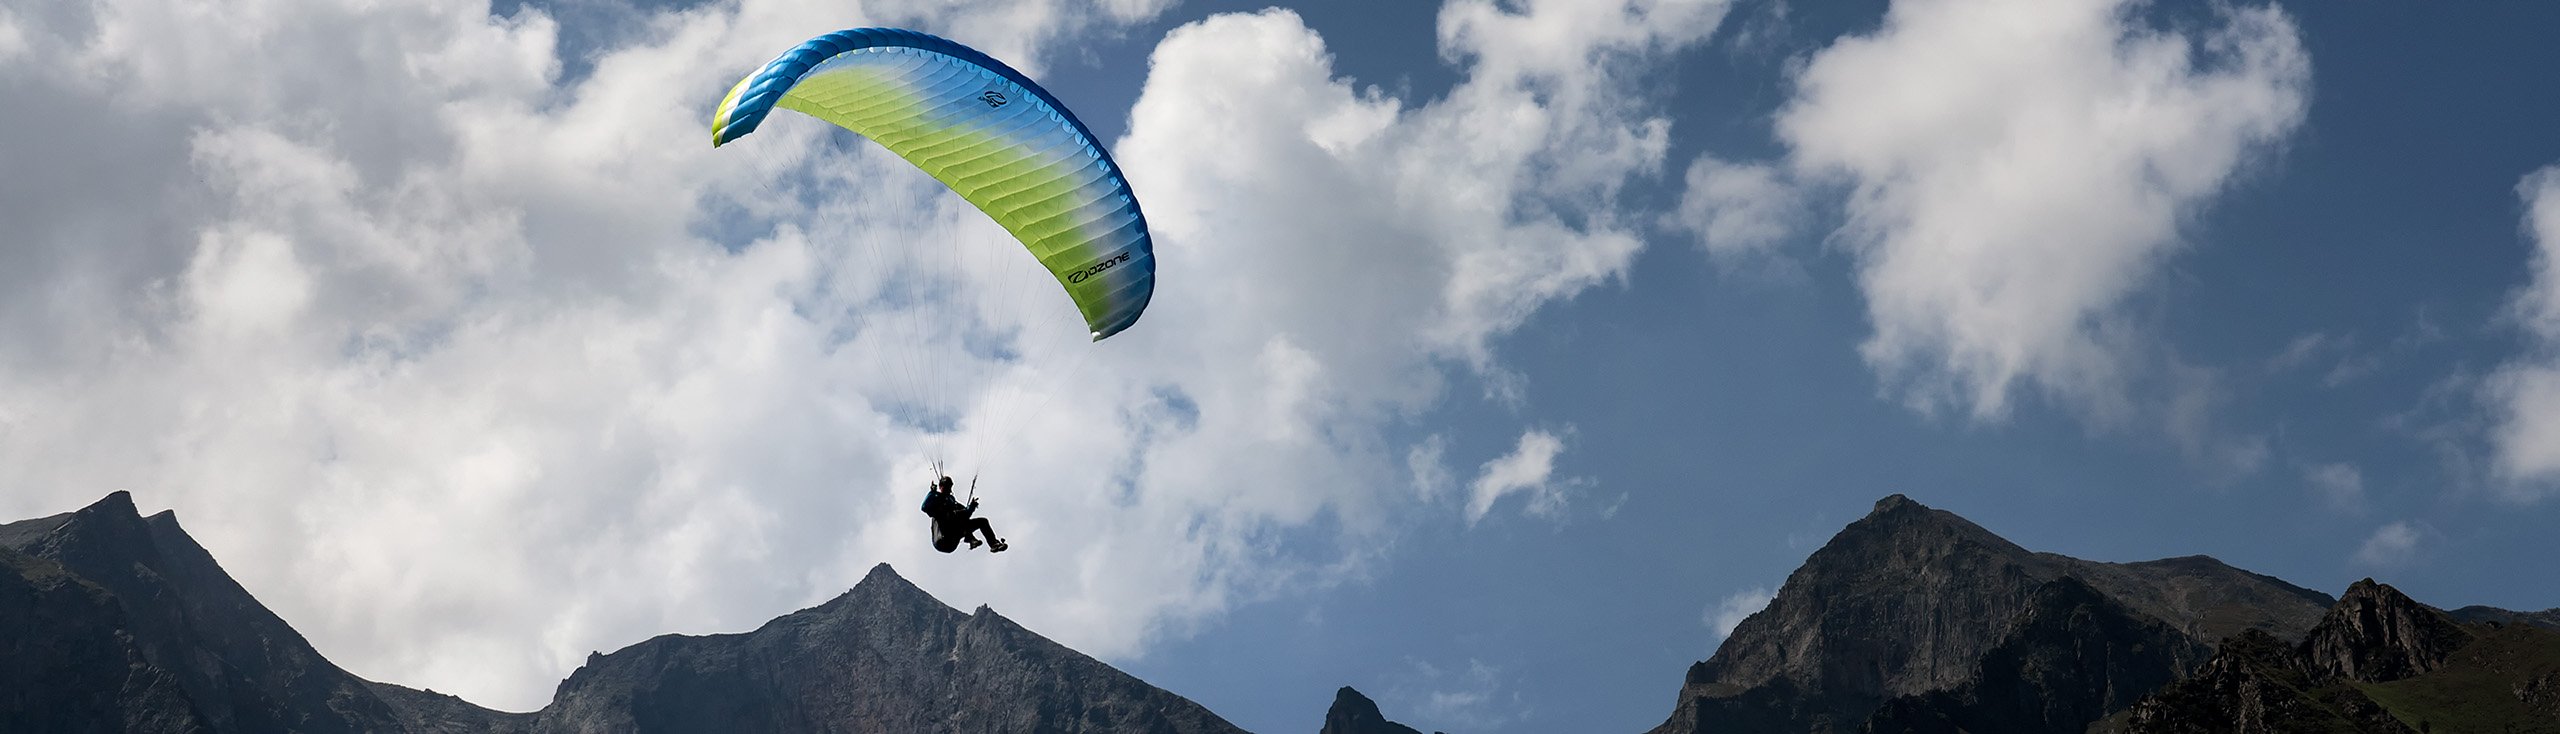 BannerSmall Paragliding Davos Klosters Flugschule